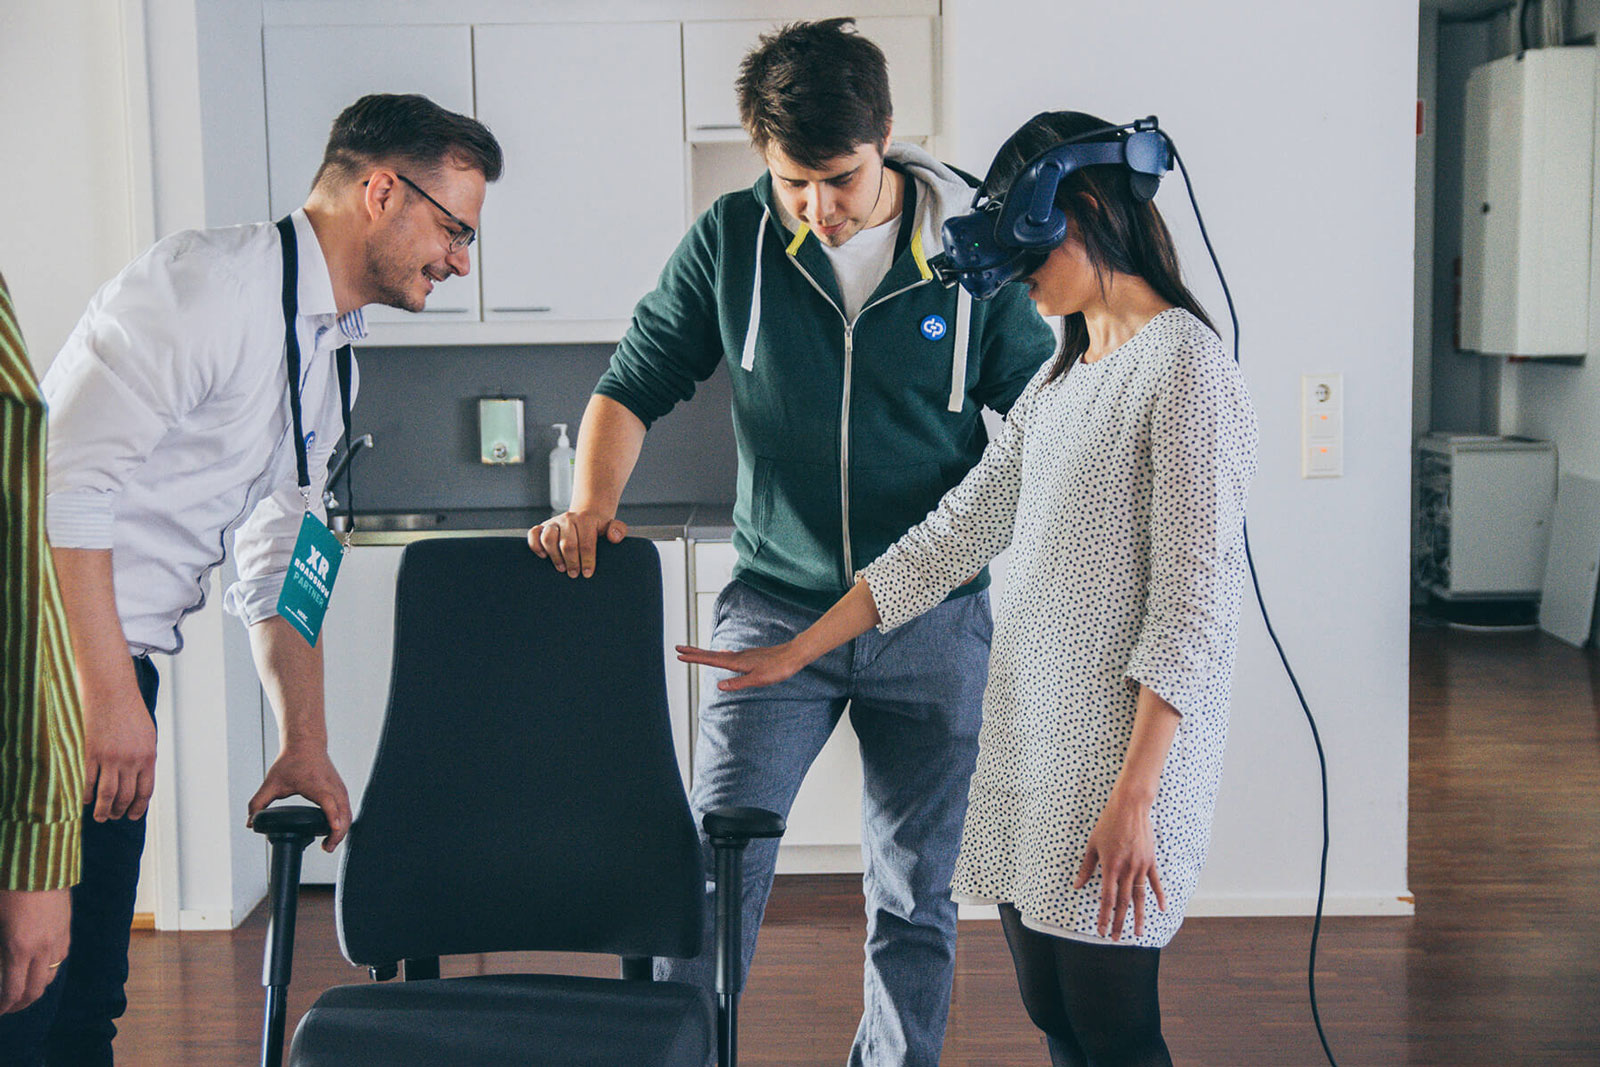 A woman trying out a virtual reality headset and reaching out. Two other people are helping her to find a chair to sit on.